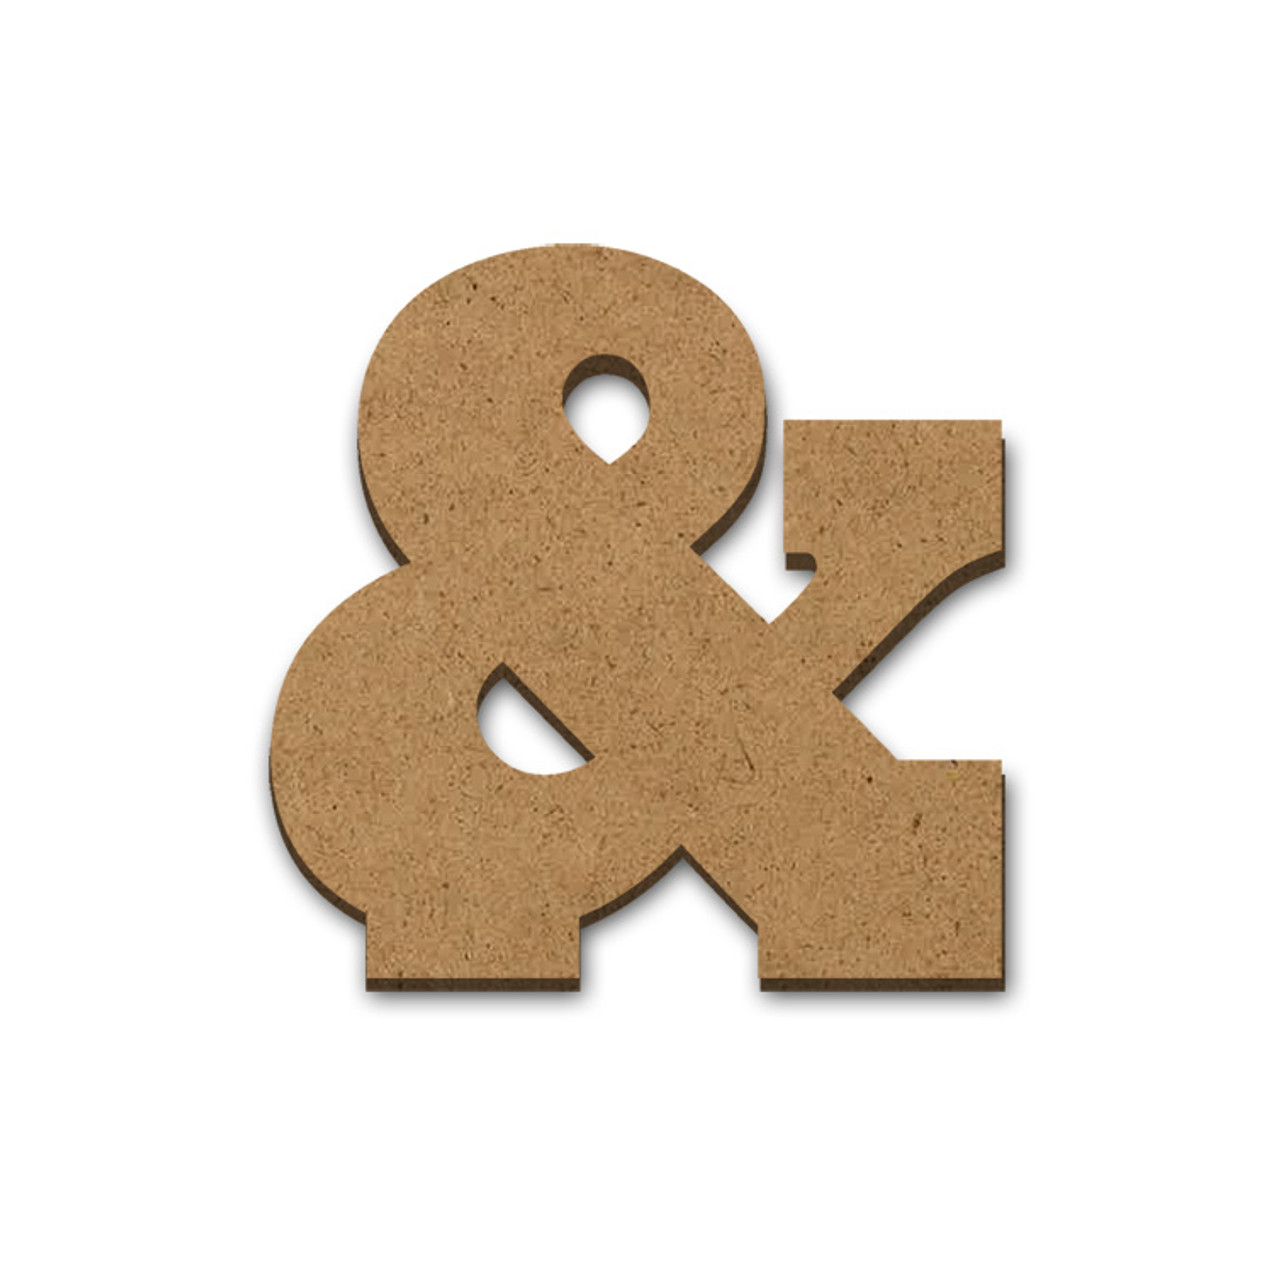 Standing Wood Letter Surface - Ampersand - 3 1/2" x 3 5/8"